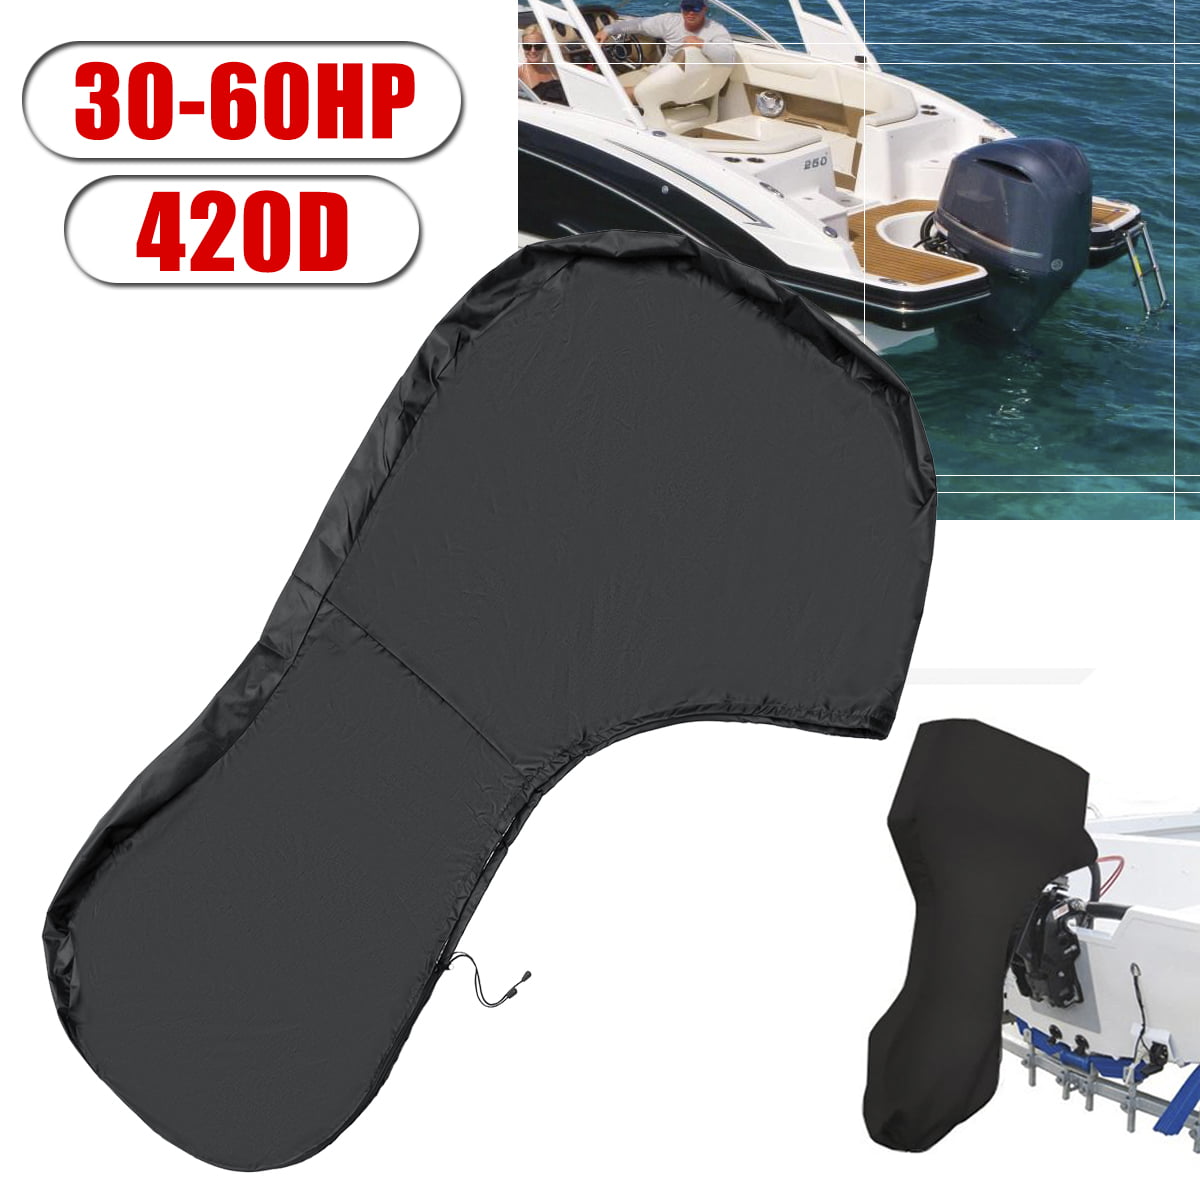 Full Outboard Motor Engine Cover Waterproof Boat Cover with 600D Heavy Duty Oxford Fabric Extra PVC Coating Fit for Motors TeBaisea Outboard Motor Cover